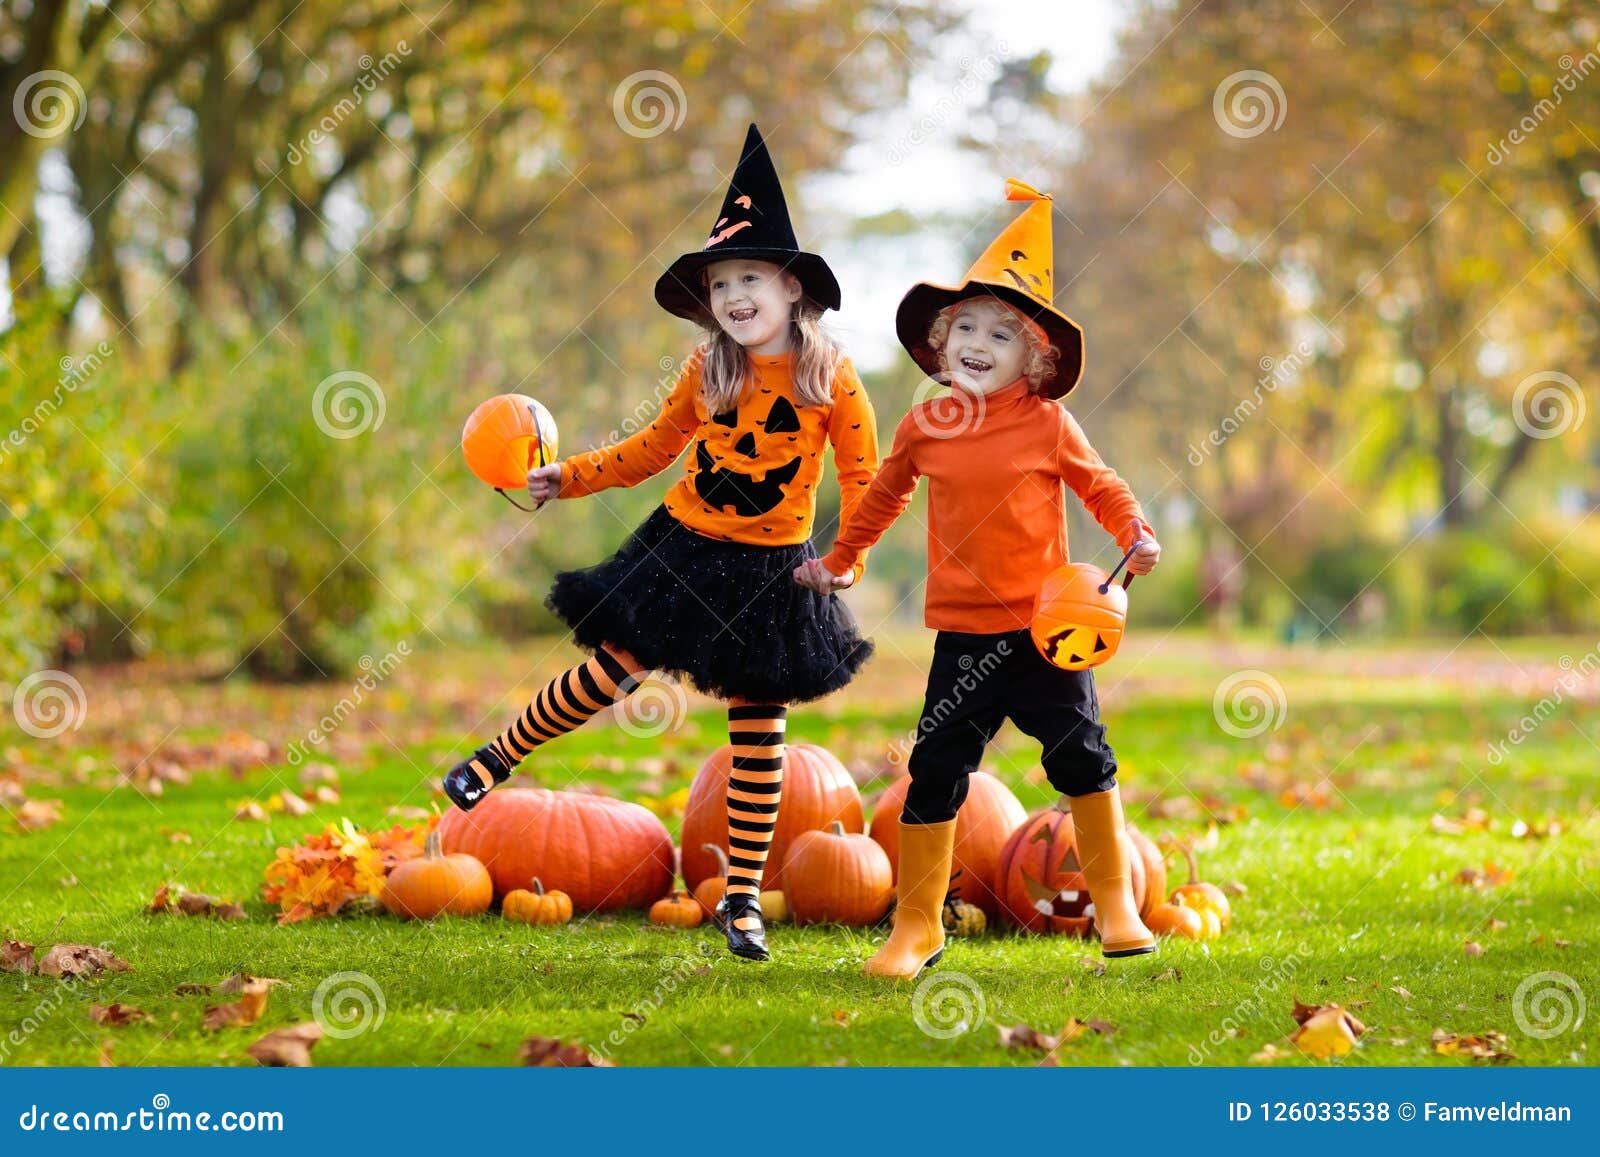 Kids with Pumpkins in Halloween Costumes Stock Photo - Image of jack ...